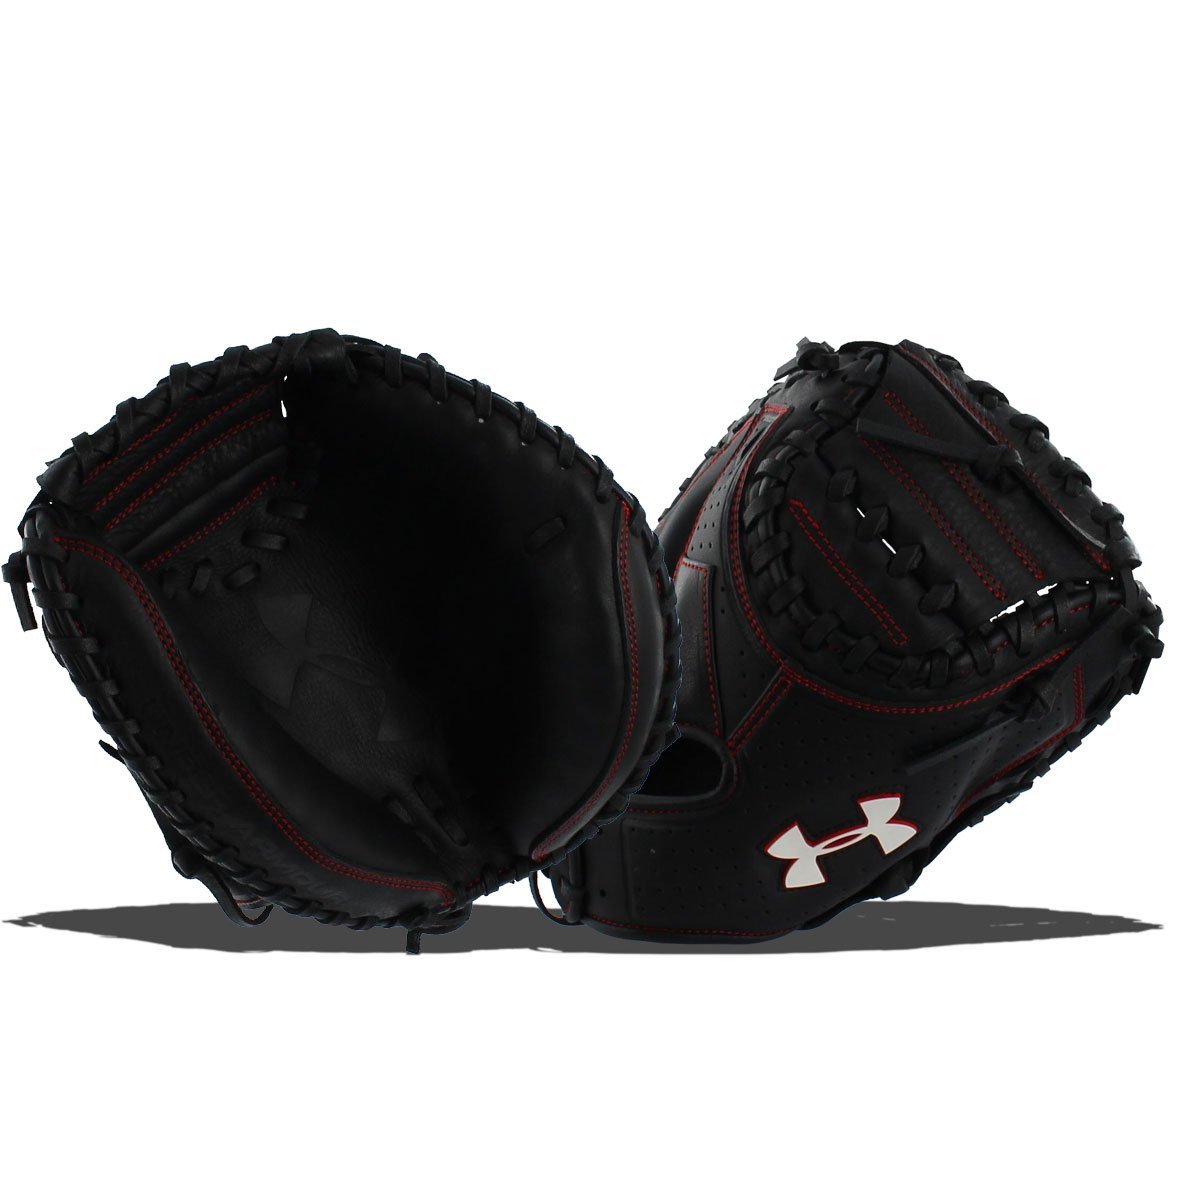 features a high end design with long lasting durability. Constructed of a leather blend with synthetic backing. Thick heel and toe padding prevent balls from popping out while padding in the base of the hand provide protection from sting. To reduce the chances of a snapped lace or torn web vertical laces sit between the web and pocket.